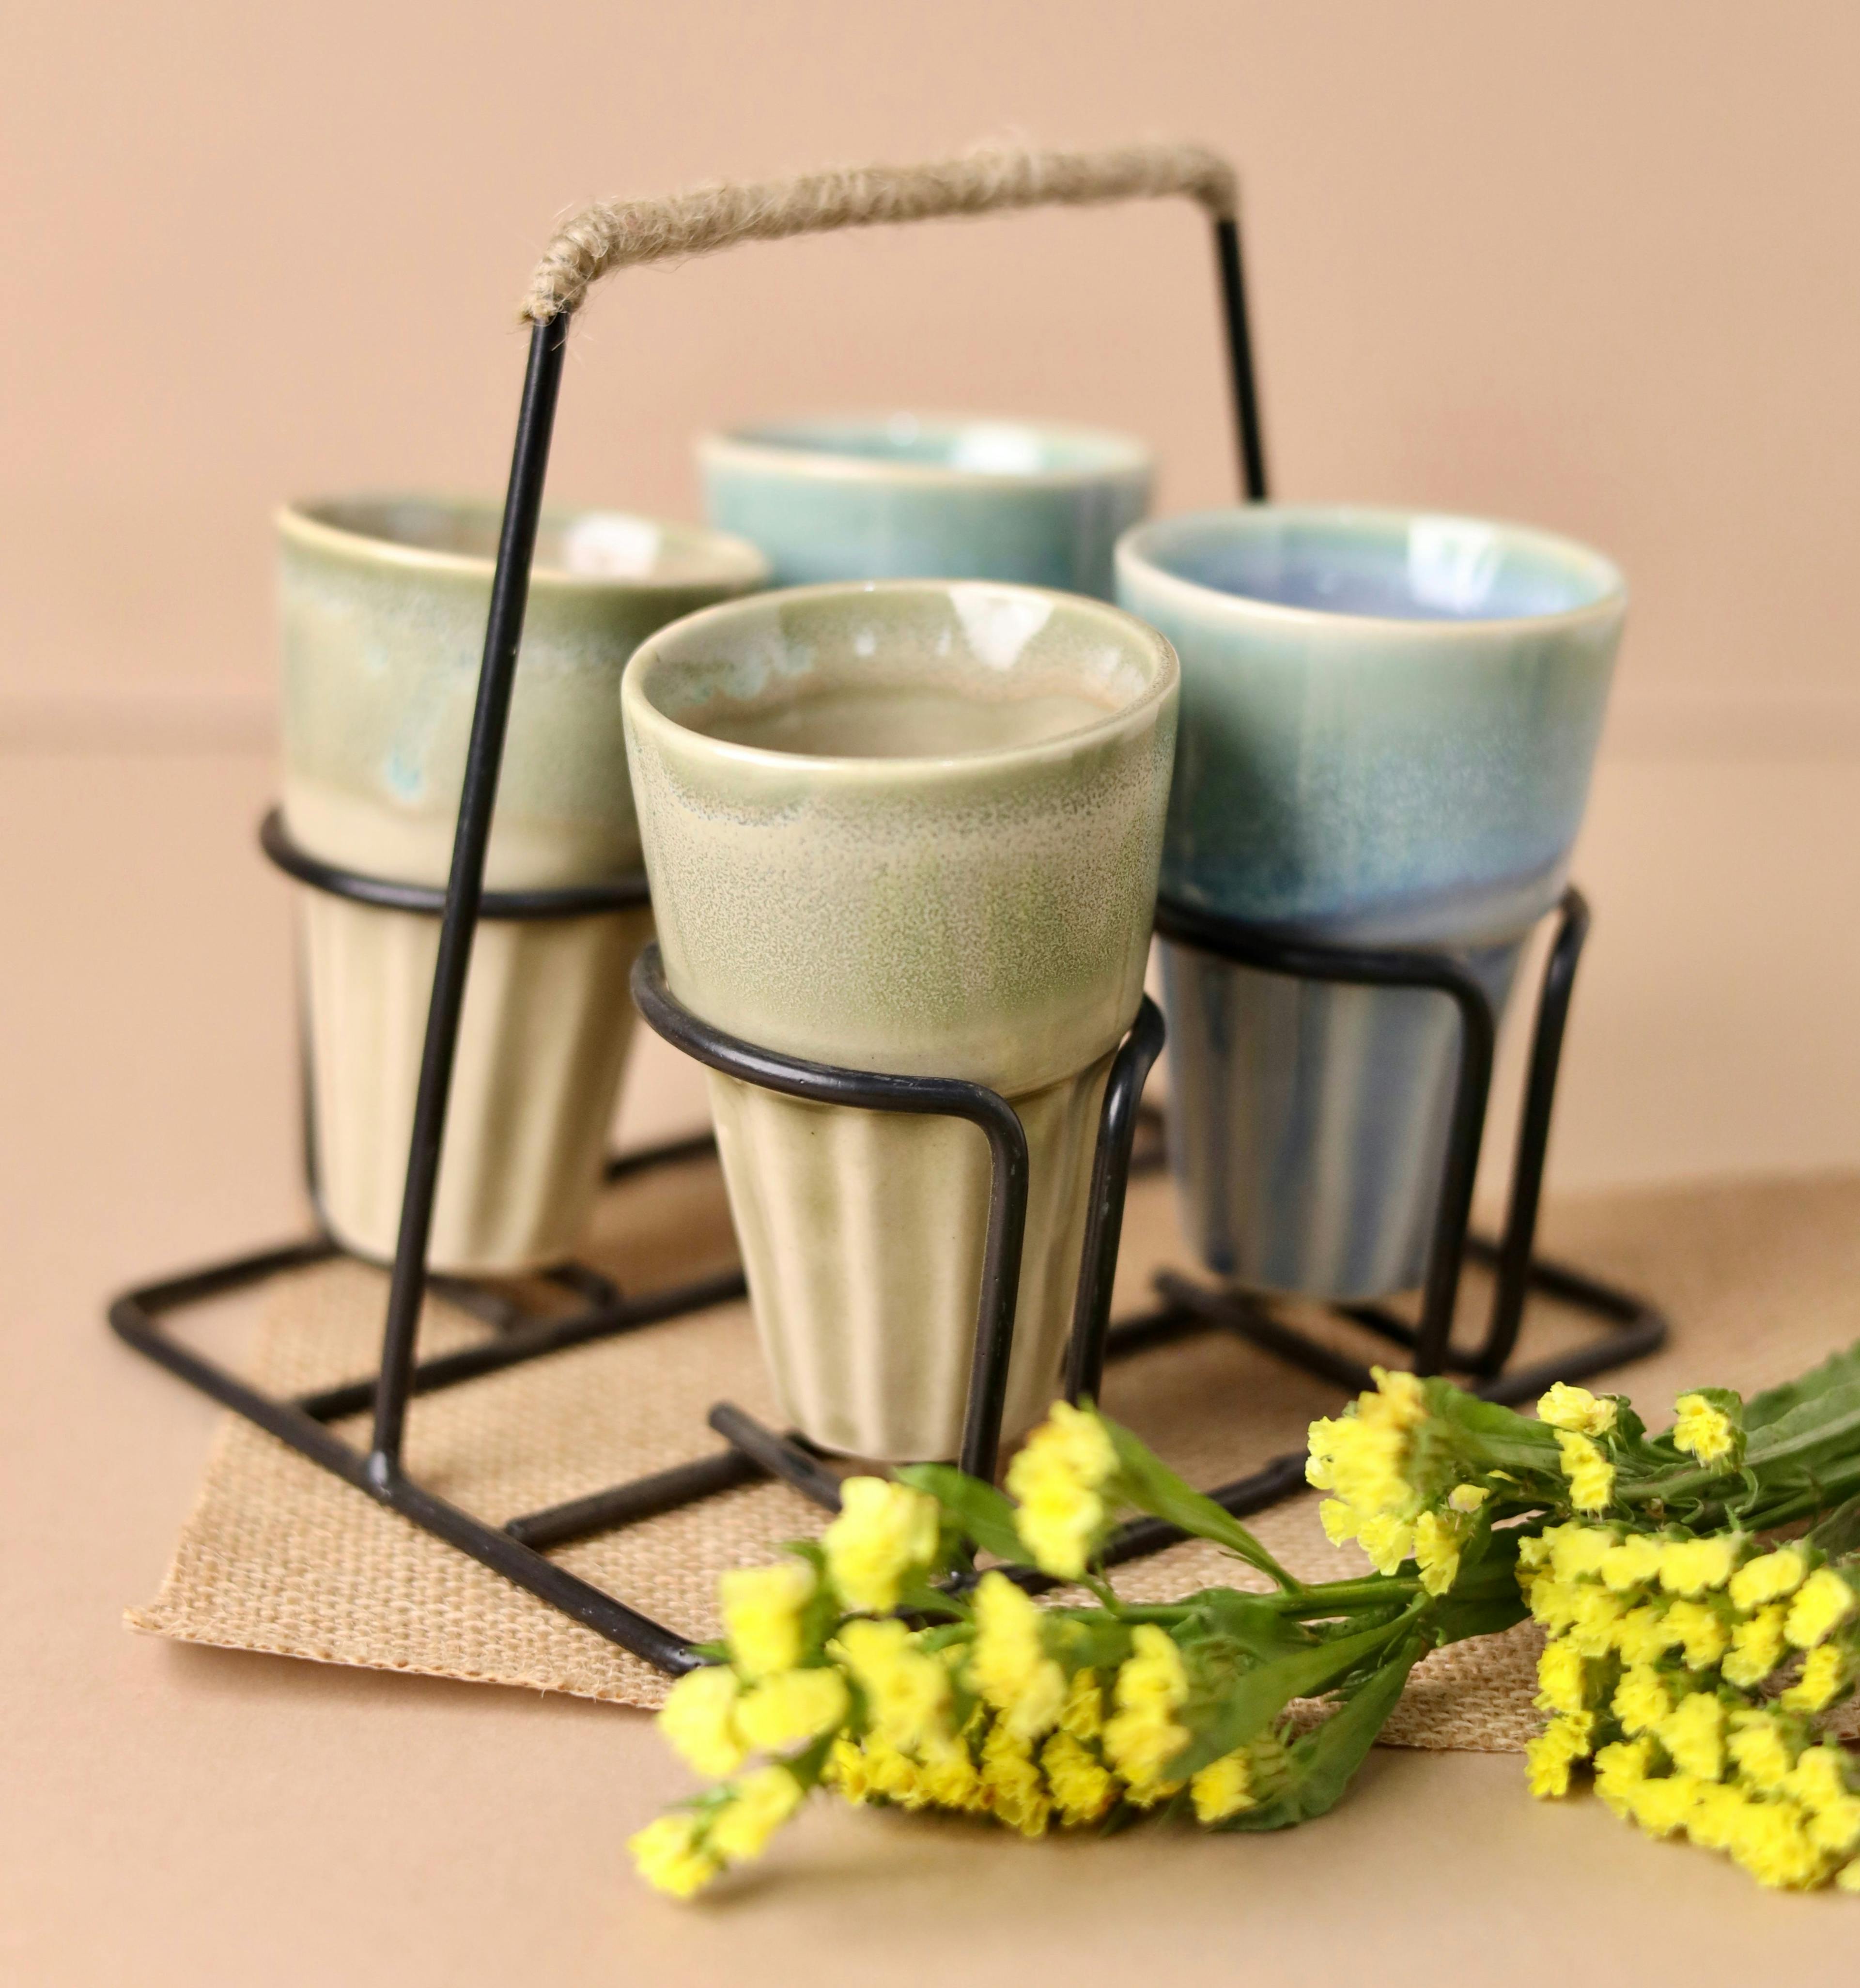 4 Chai Glasses with Stand - Light Green and Light Blue, a product by Olive Home accent